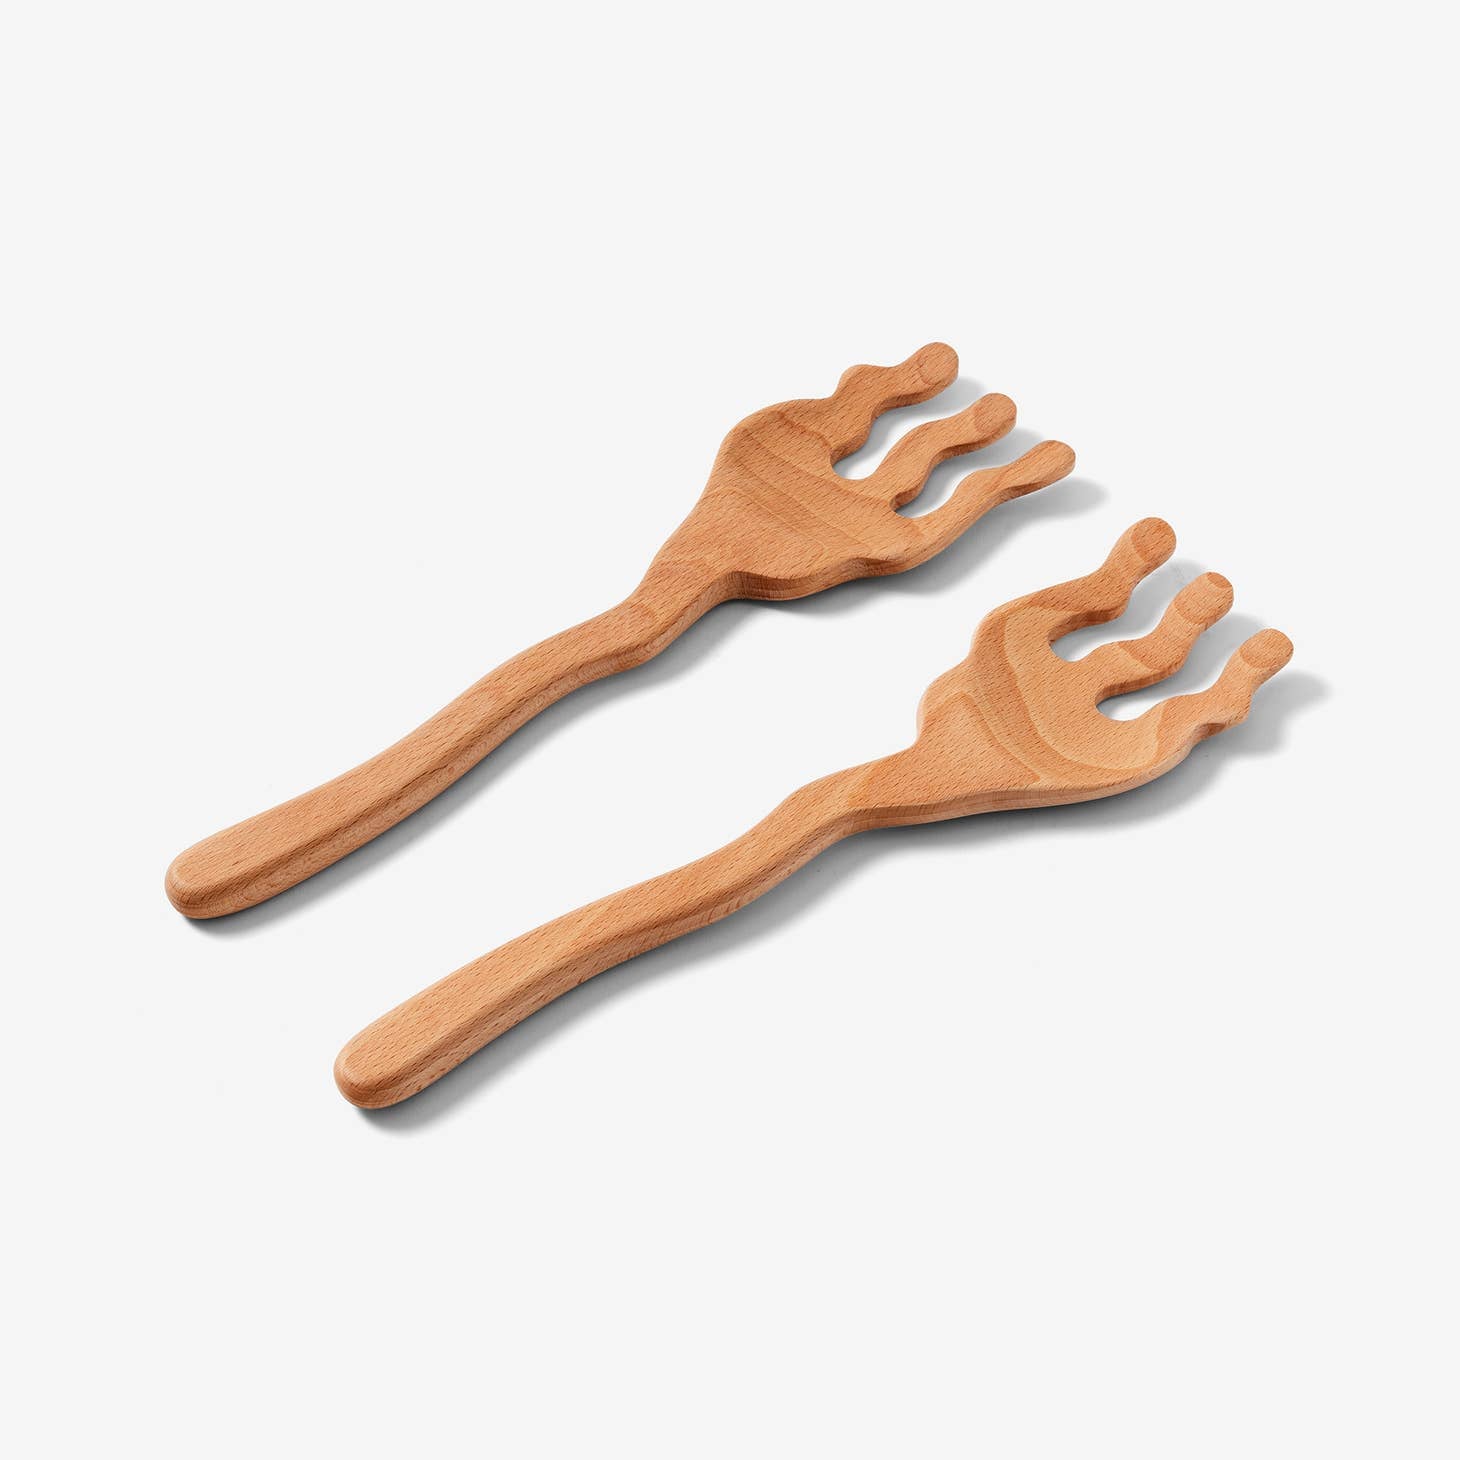 areaware serving friends, flowers wavy / Whoever said food isn’t to be played with hasn’t met Serving Friends.  These wooden spoons, carved into charming shapes, bring joy and humor to your dining table. made with beech wood.